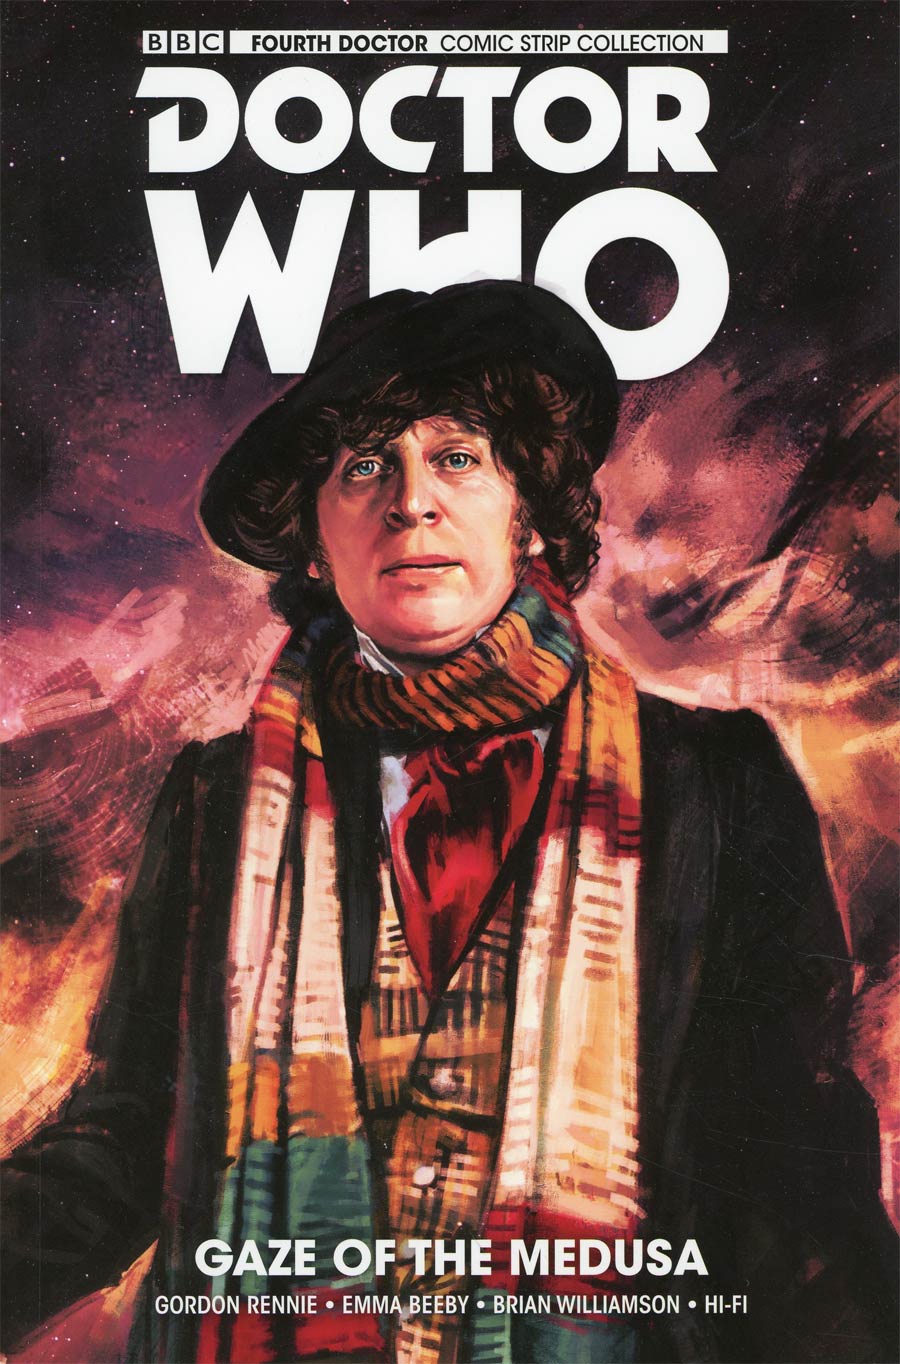 Doctor Who 4th Doctor Vol 1 Gaze Of The Medusa TP